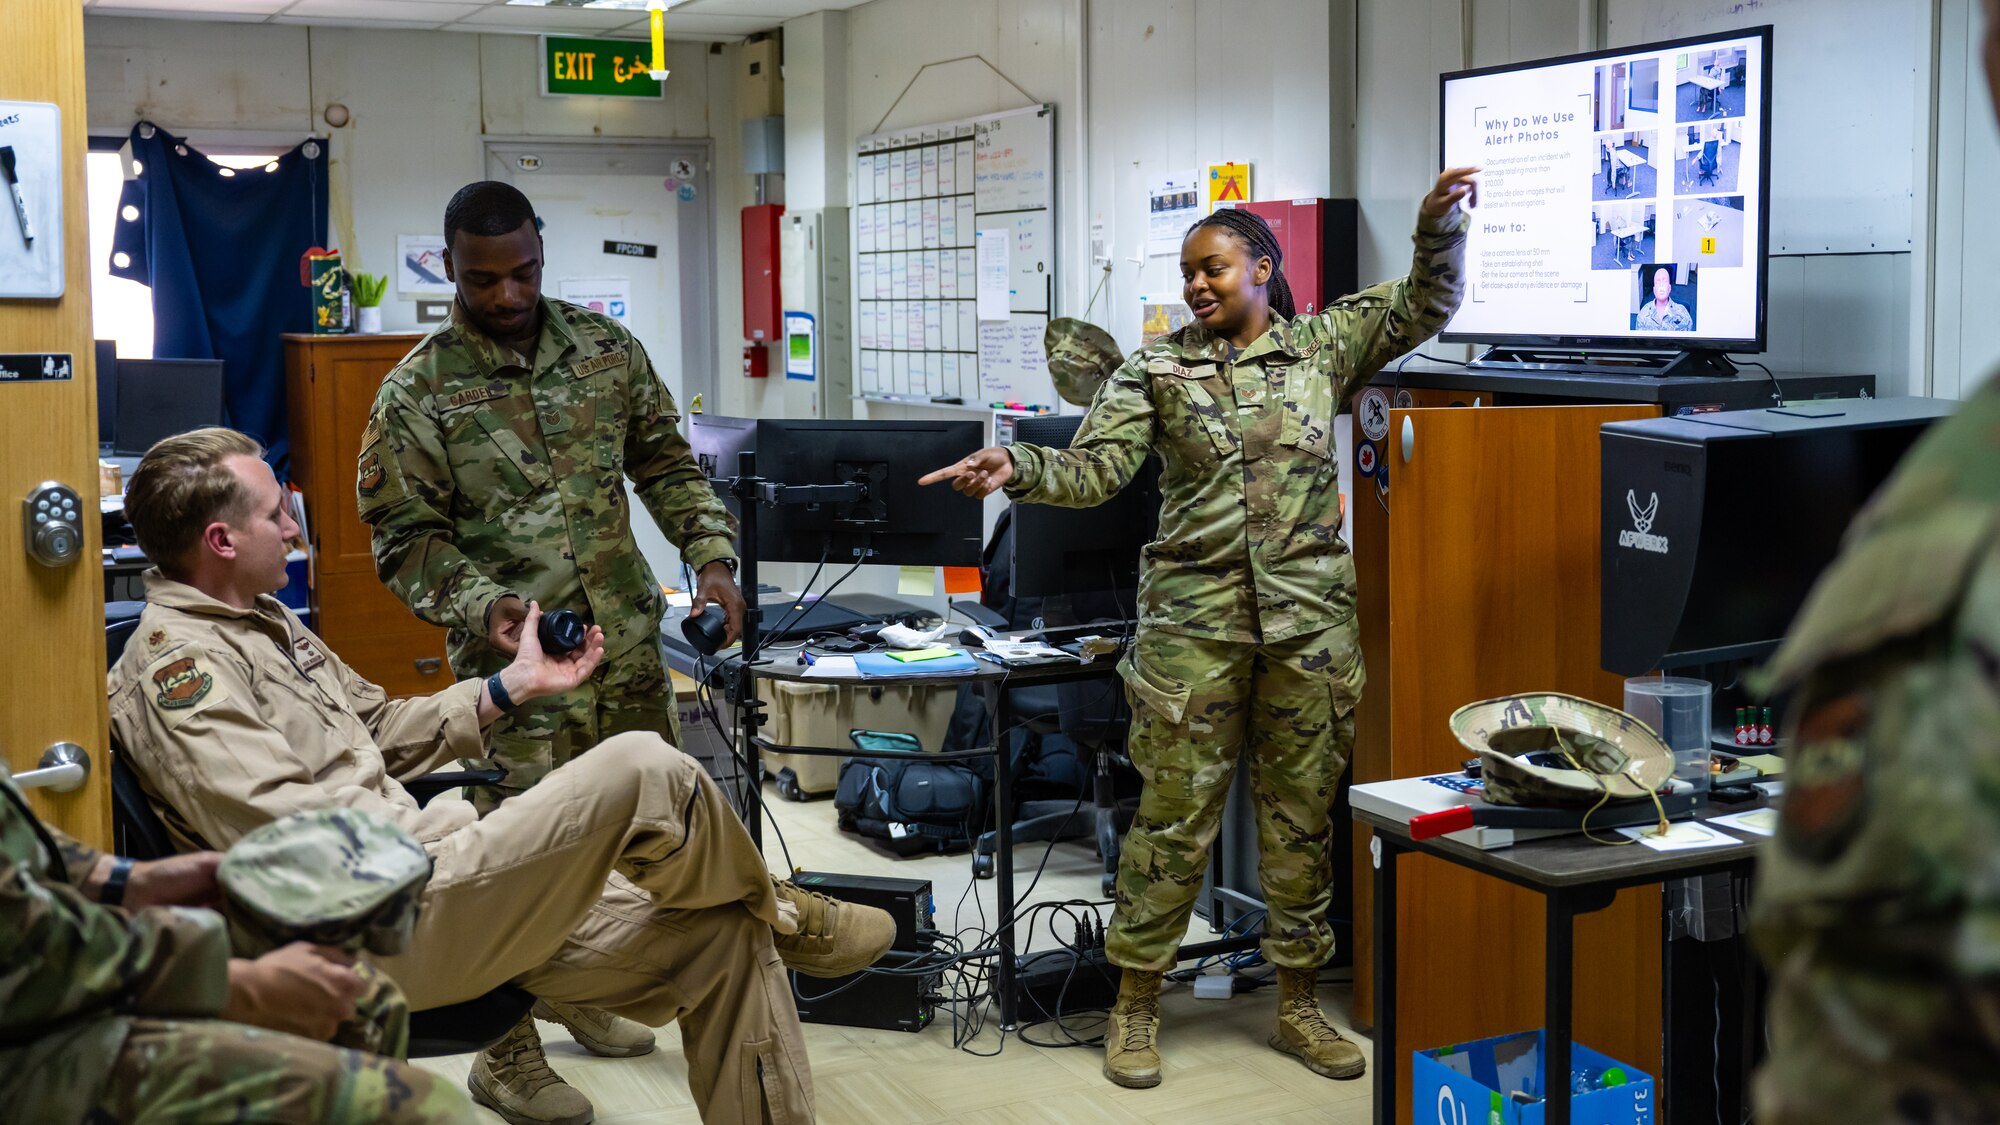 U.S. Air Force Staff Sgt. Breanna Diaz, 386th Air Expeditionary Wing public affairs specialist, teaches a class about alert photography procedures to Airmen from the 386th AEW safety office at Ali Al Salem Air Base, Kuwait, June 21, 2023. As Multi-Capable Airmen, the 386th AEW safety team is now equipped with the skills to photograph a variety of scenarios and provide the imagery to investigators. (U.S. Air Force photo by Staff Sgt. Kevin Long)